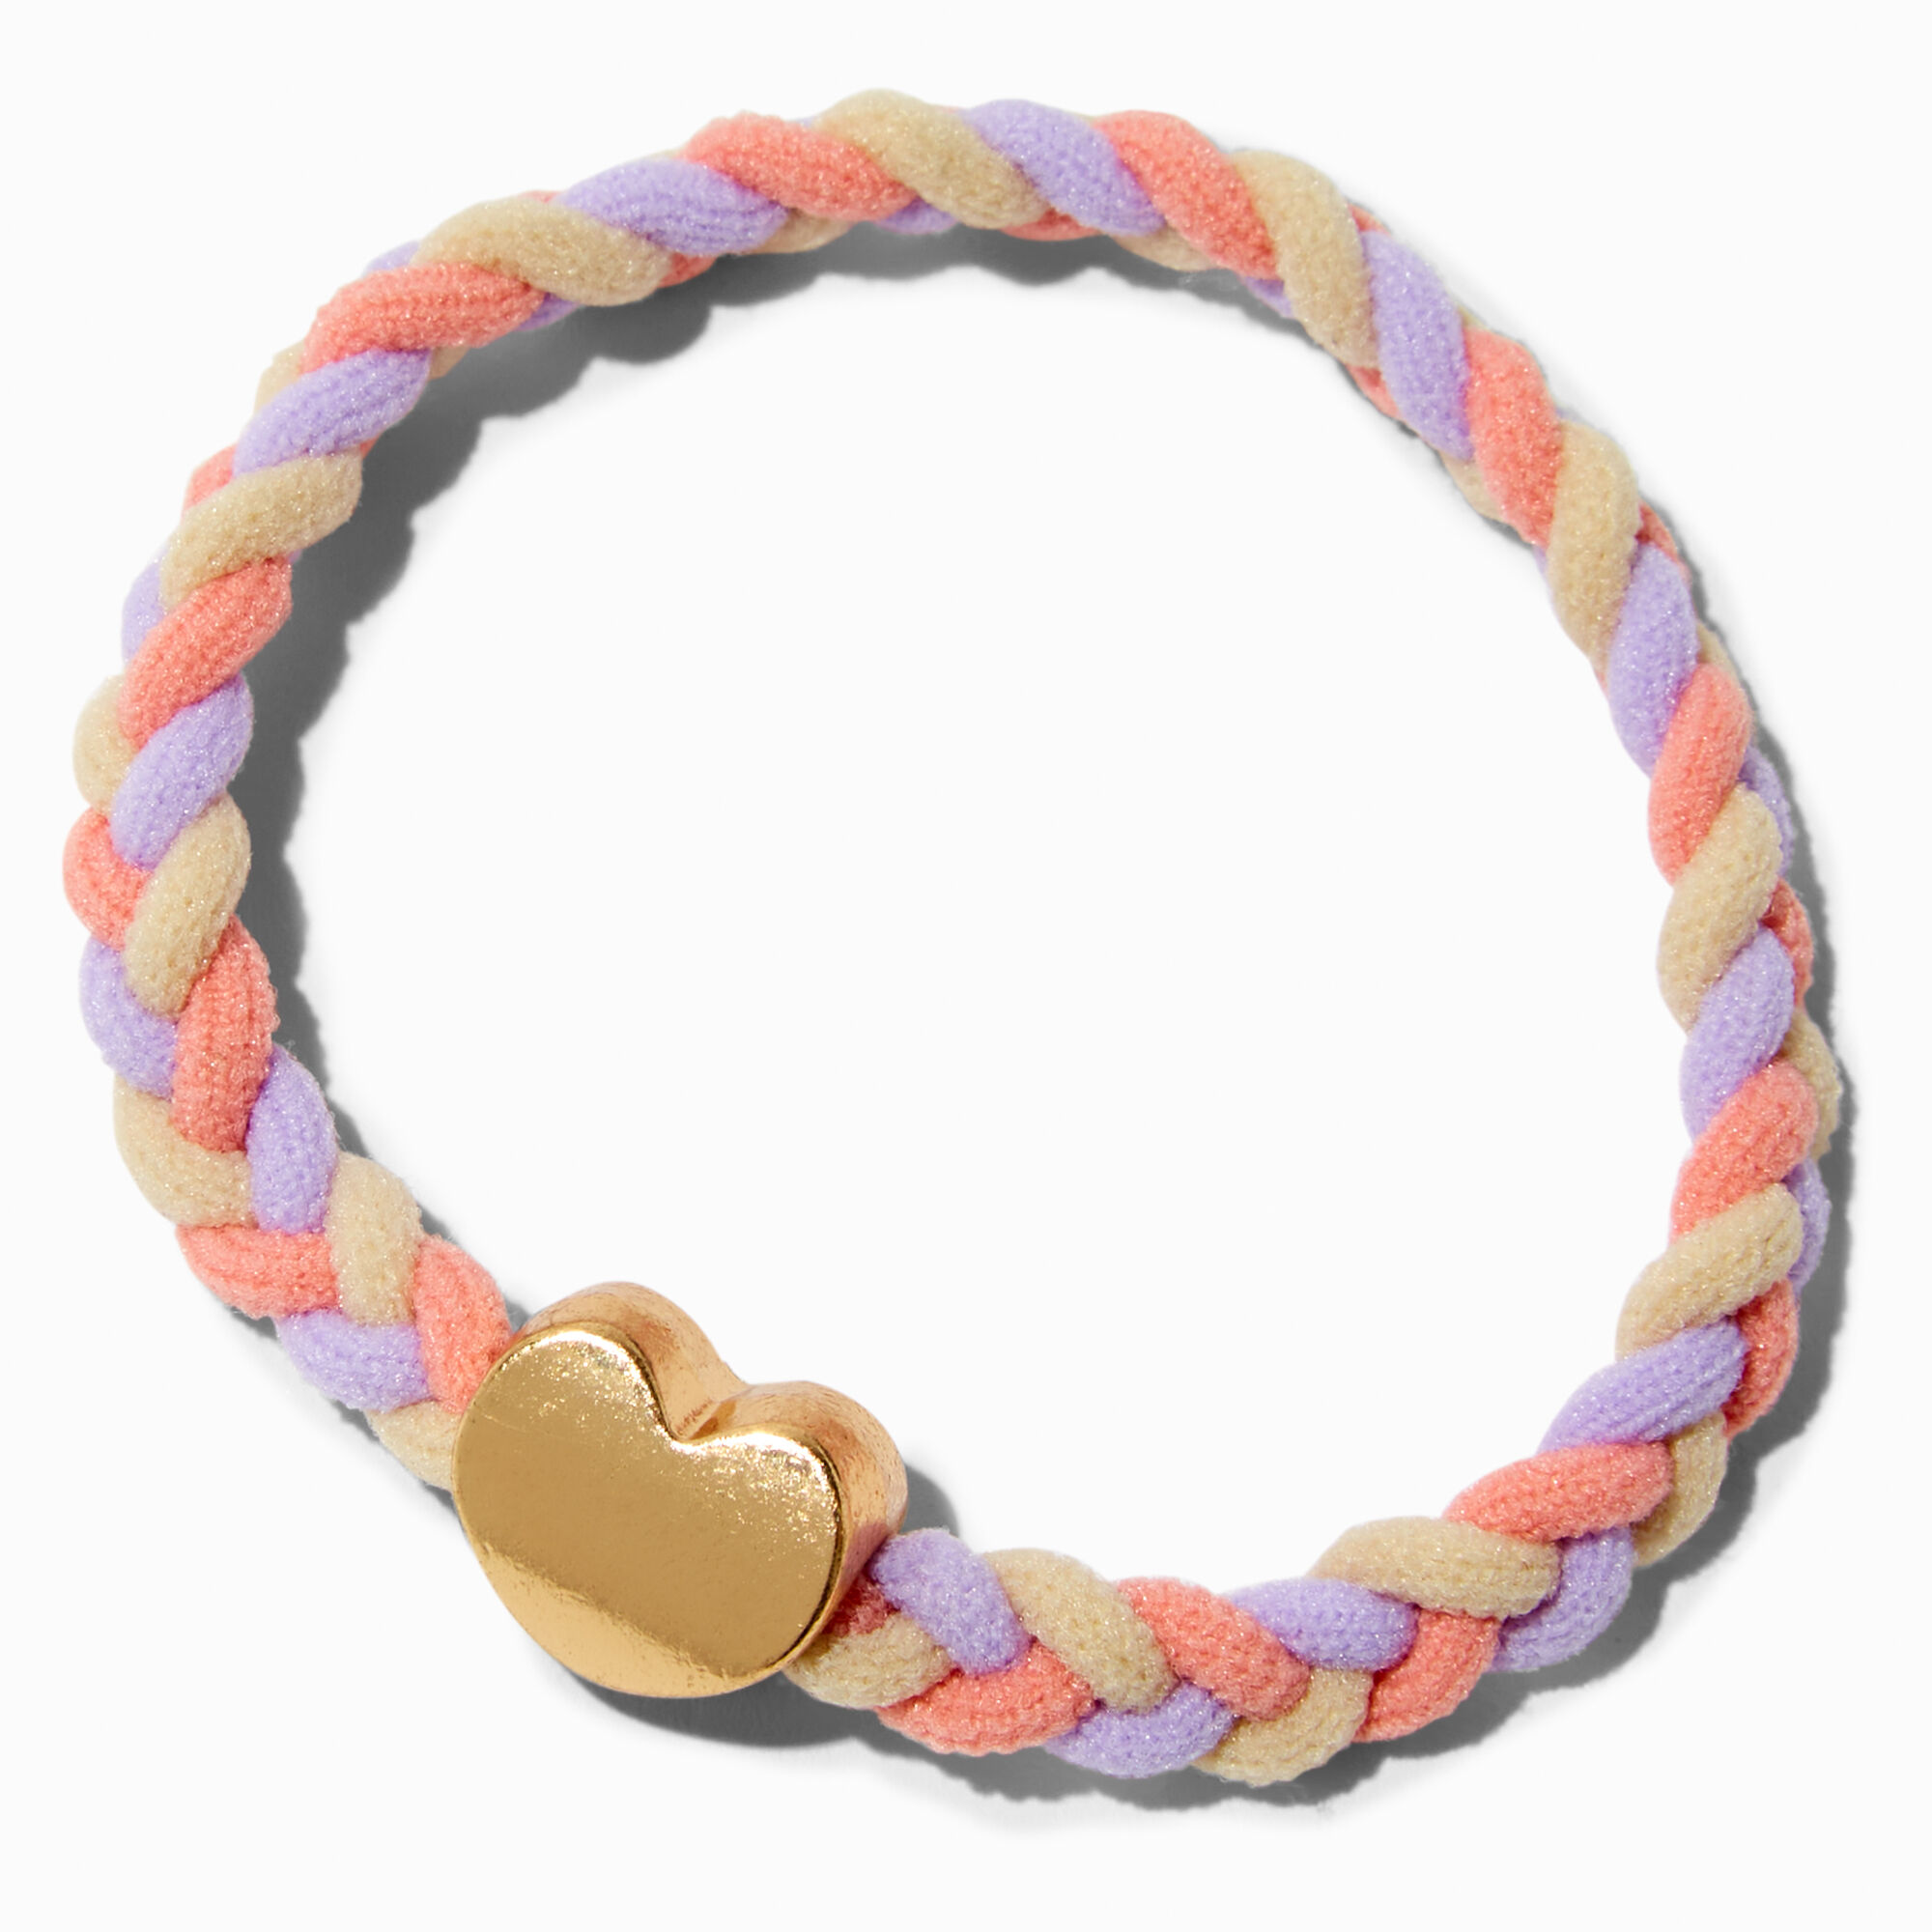 View Claires GoldTone Heart Braided Woven Stretch Bracelet Pink information